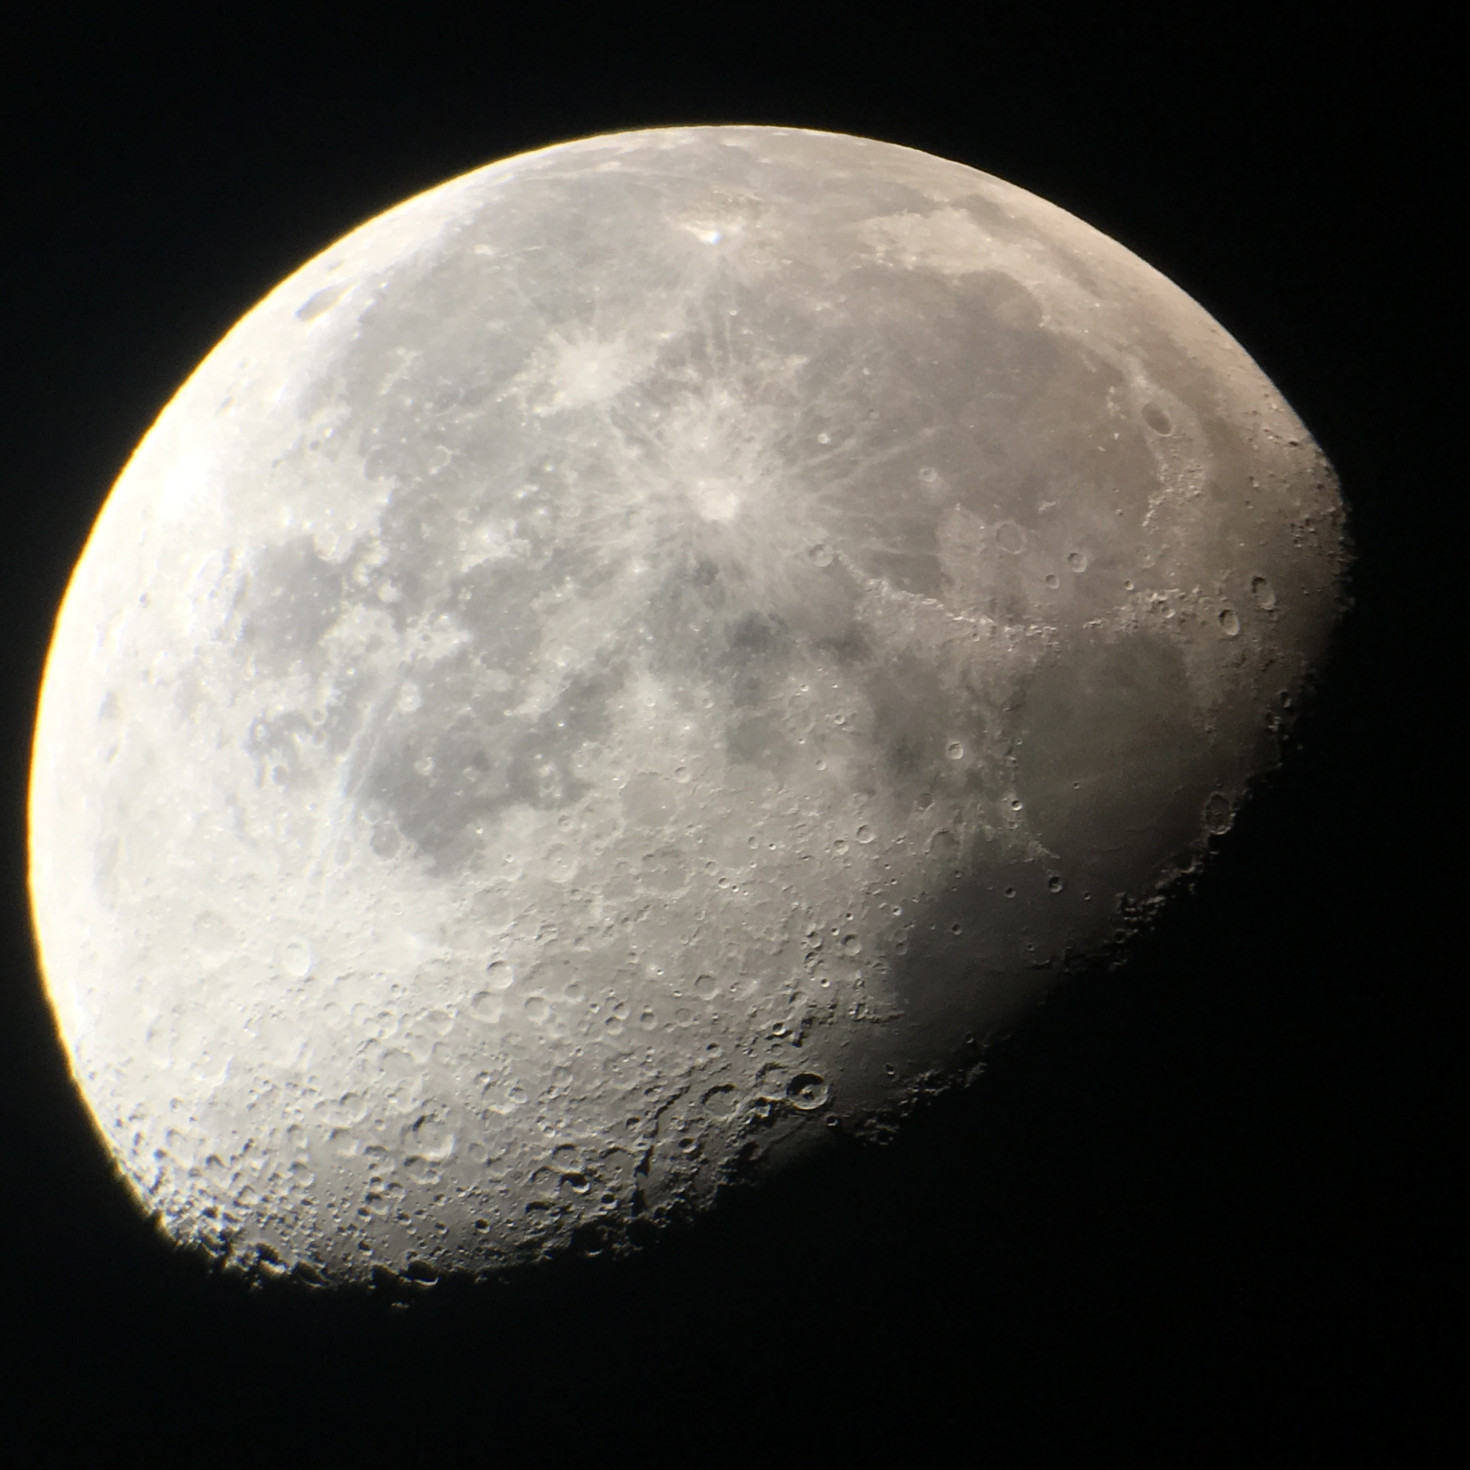 The shot: the Moon captured with a smartphone